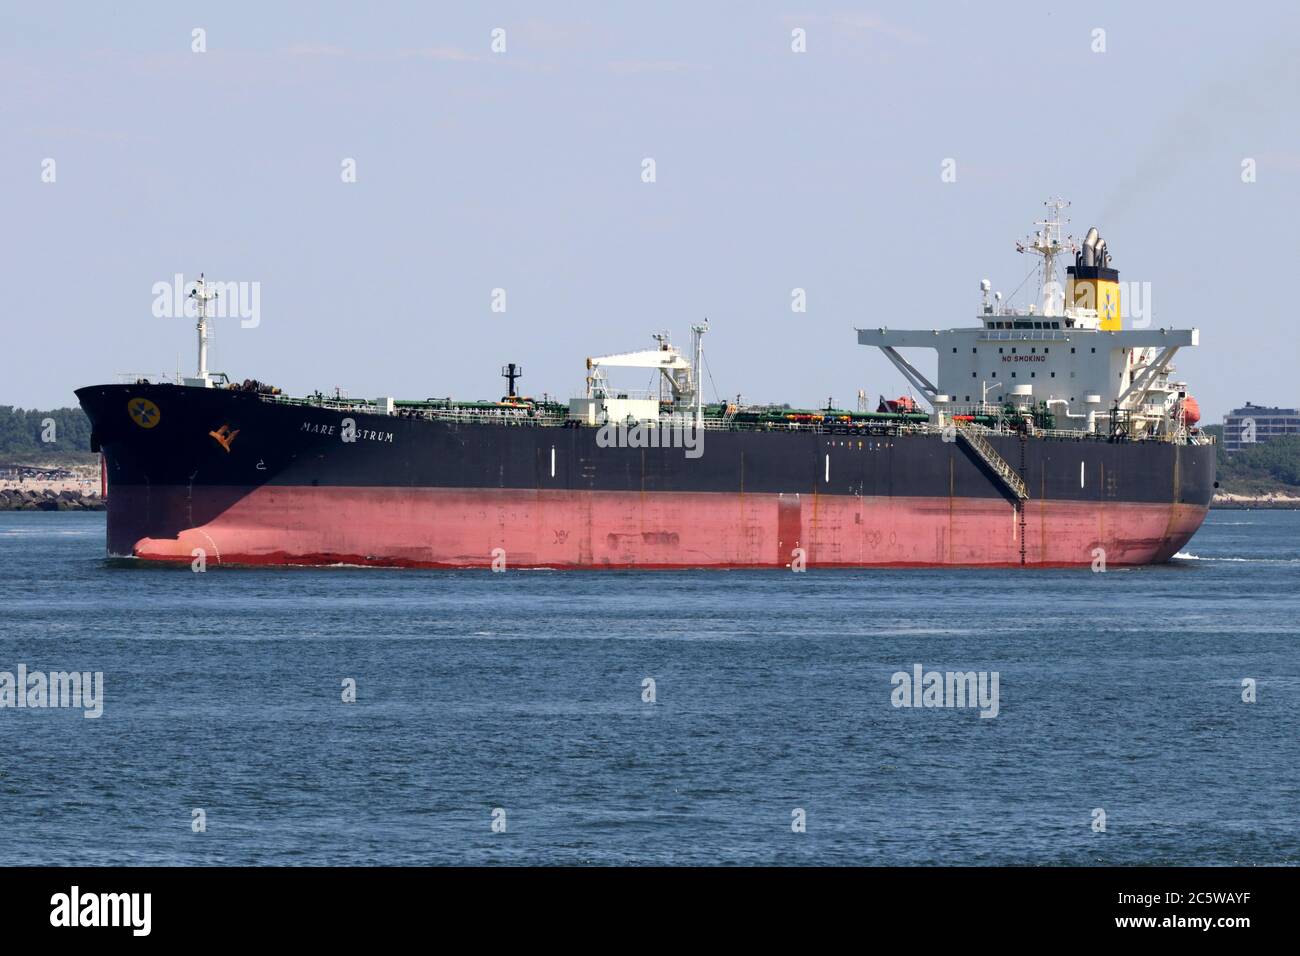 The crude oil tanker Mare Nostrum is leaving the port of Rotterdam on May 30, 2020. Stock Photo